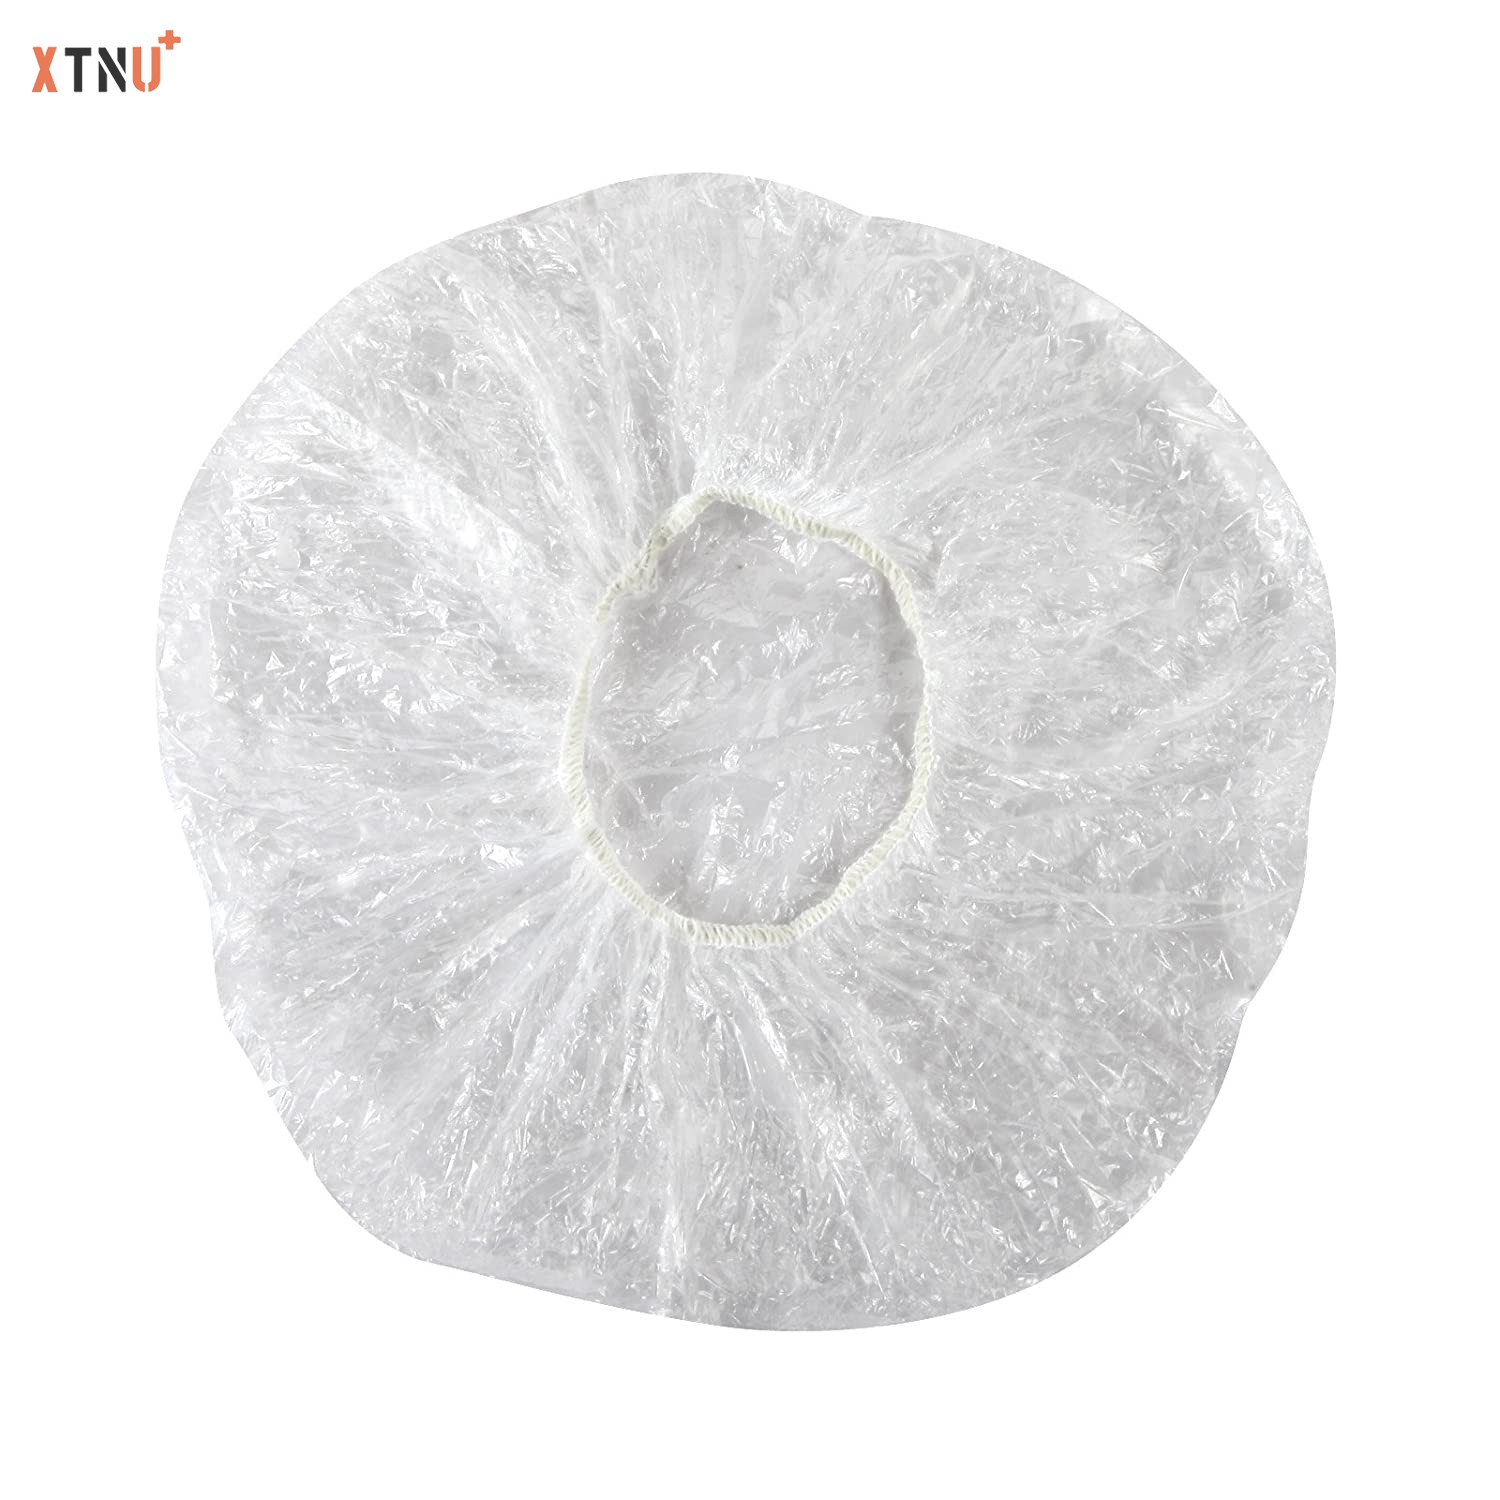 Designed for applications in the Beauty and SPA industry.  Disposable PE Shower Cap is made of superior quality, durable plastic, guaranteed not to tear during your bathing time. Enjoy your shower without fear of water getting through the transparent cap!